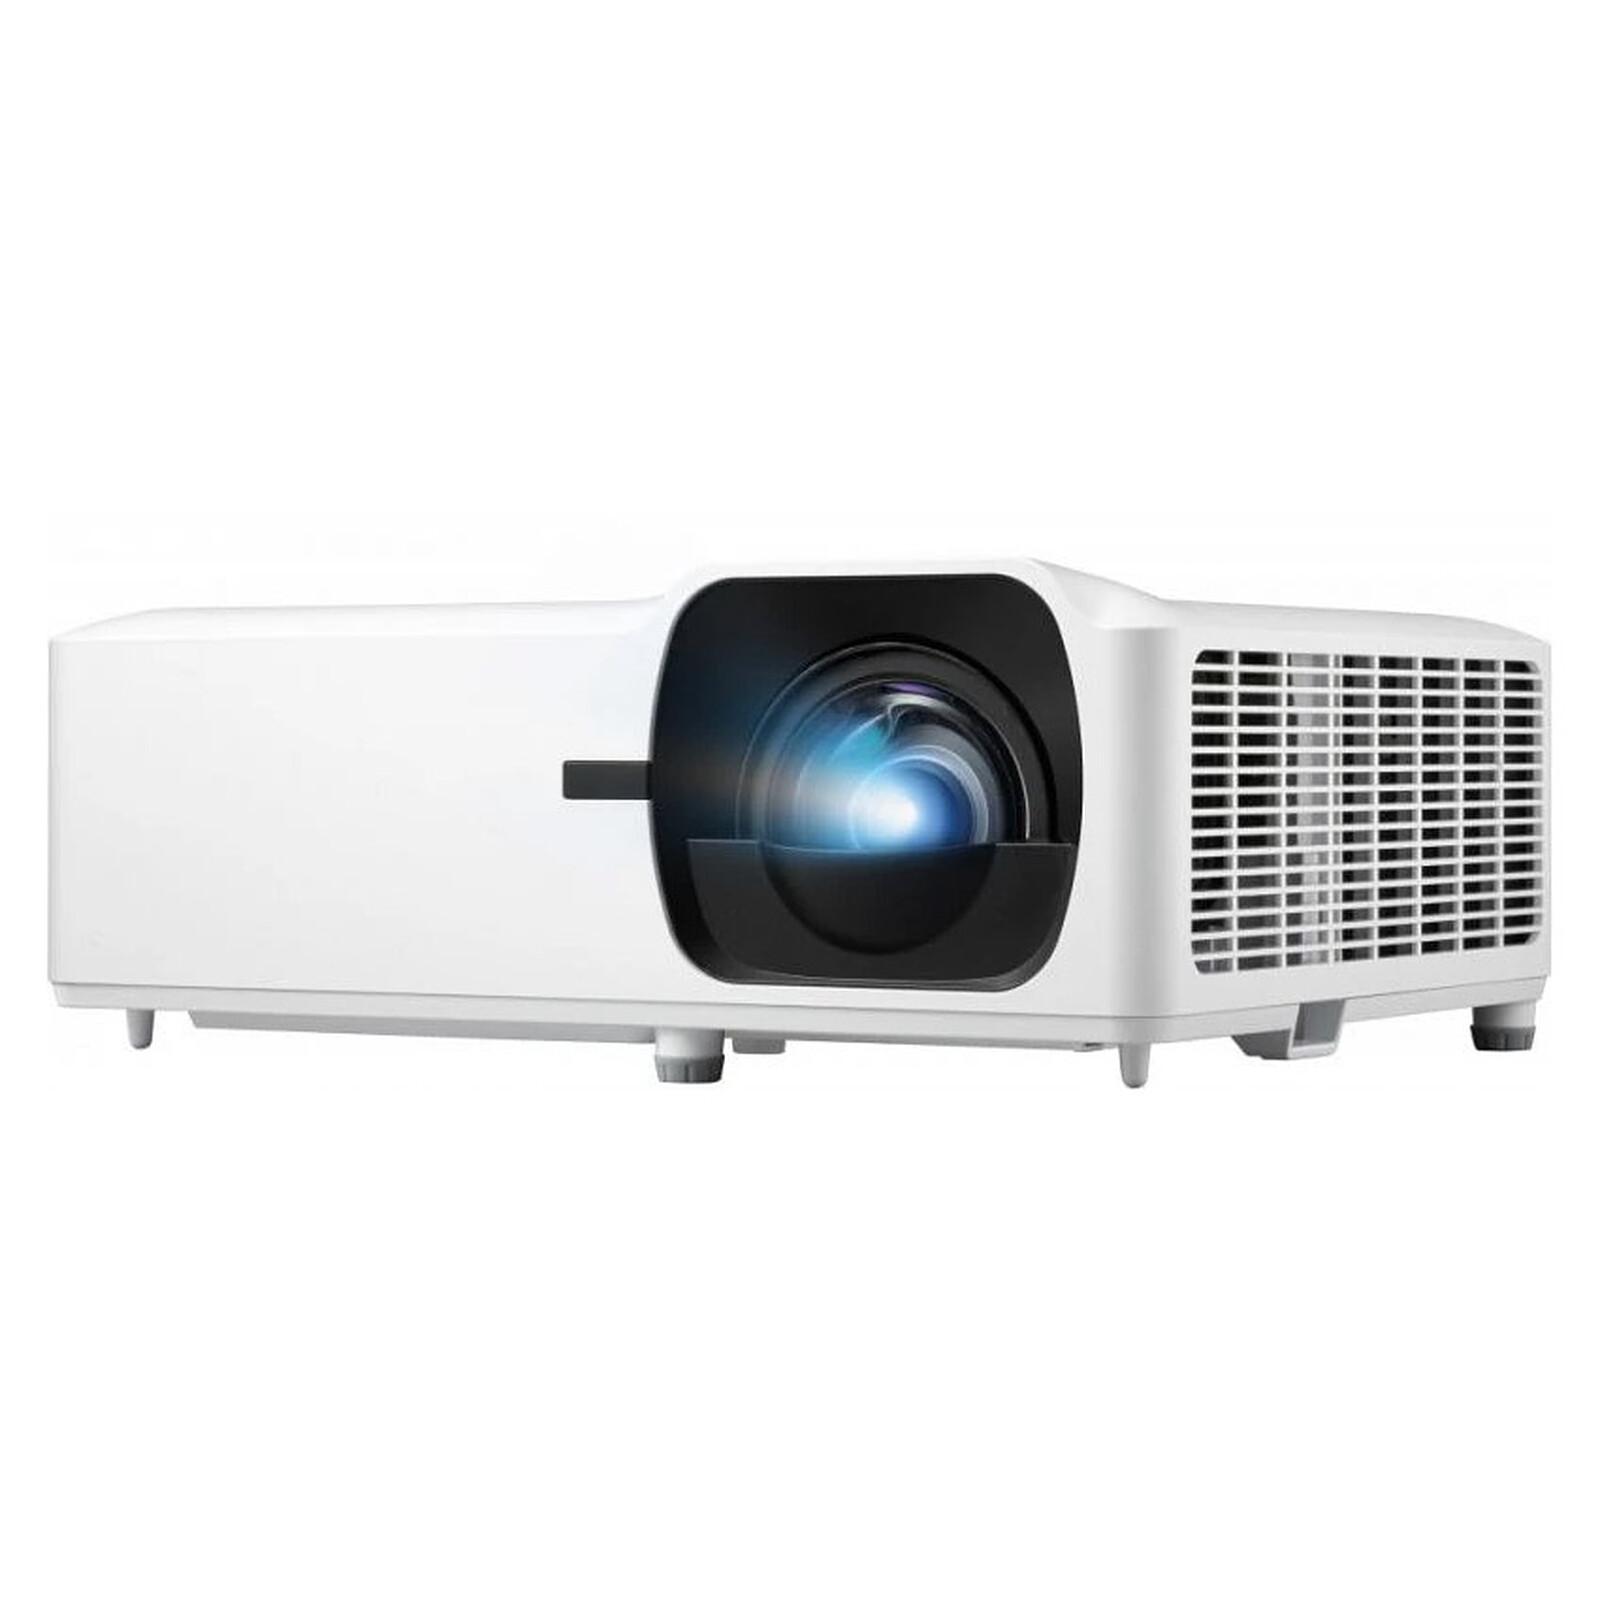 Video Proyector LED ViewSonic LS550WH . Corta Distancia